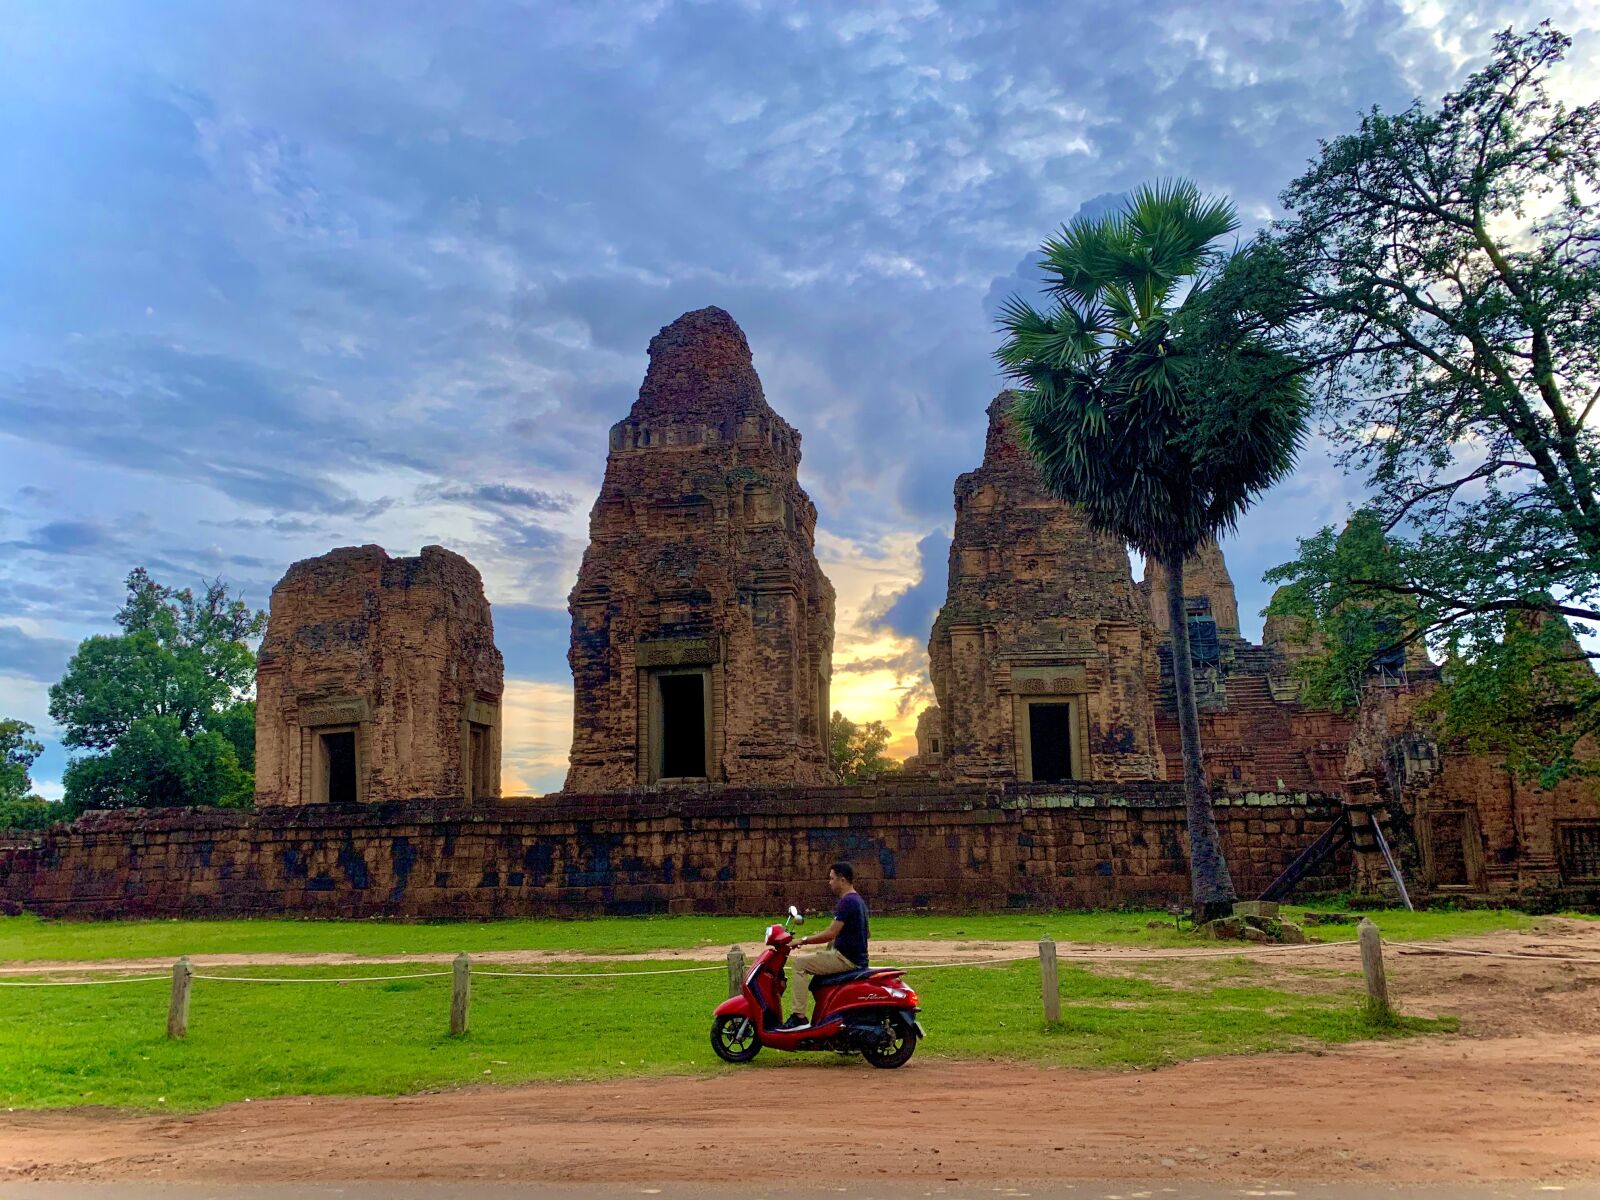 Apple iPhone XS Max + iPhone XS Max back dual camera 4.25mm f/1.8 sample photo. Temple, motorbike, siemreap photography